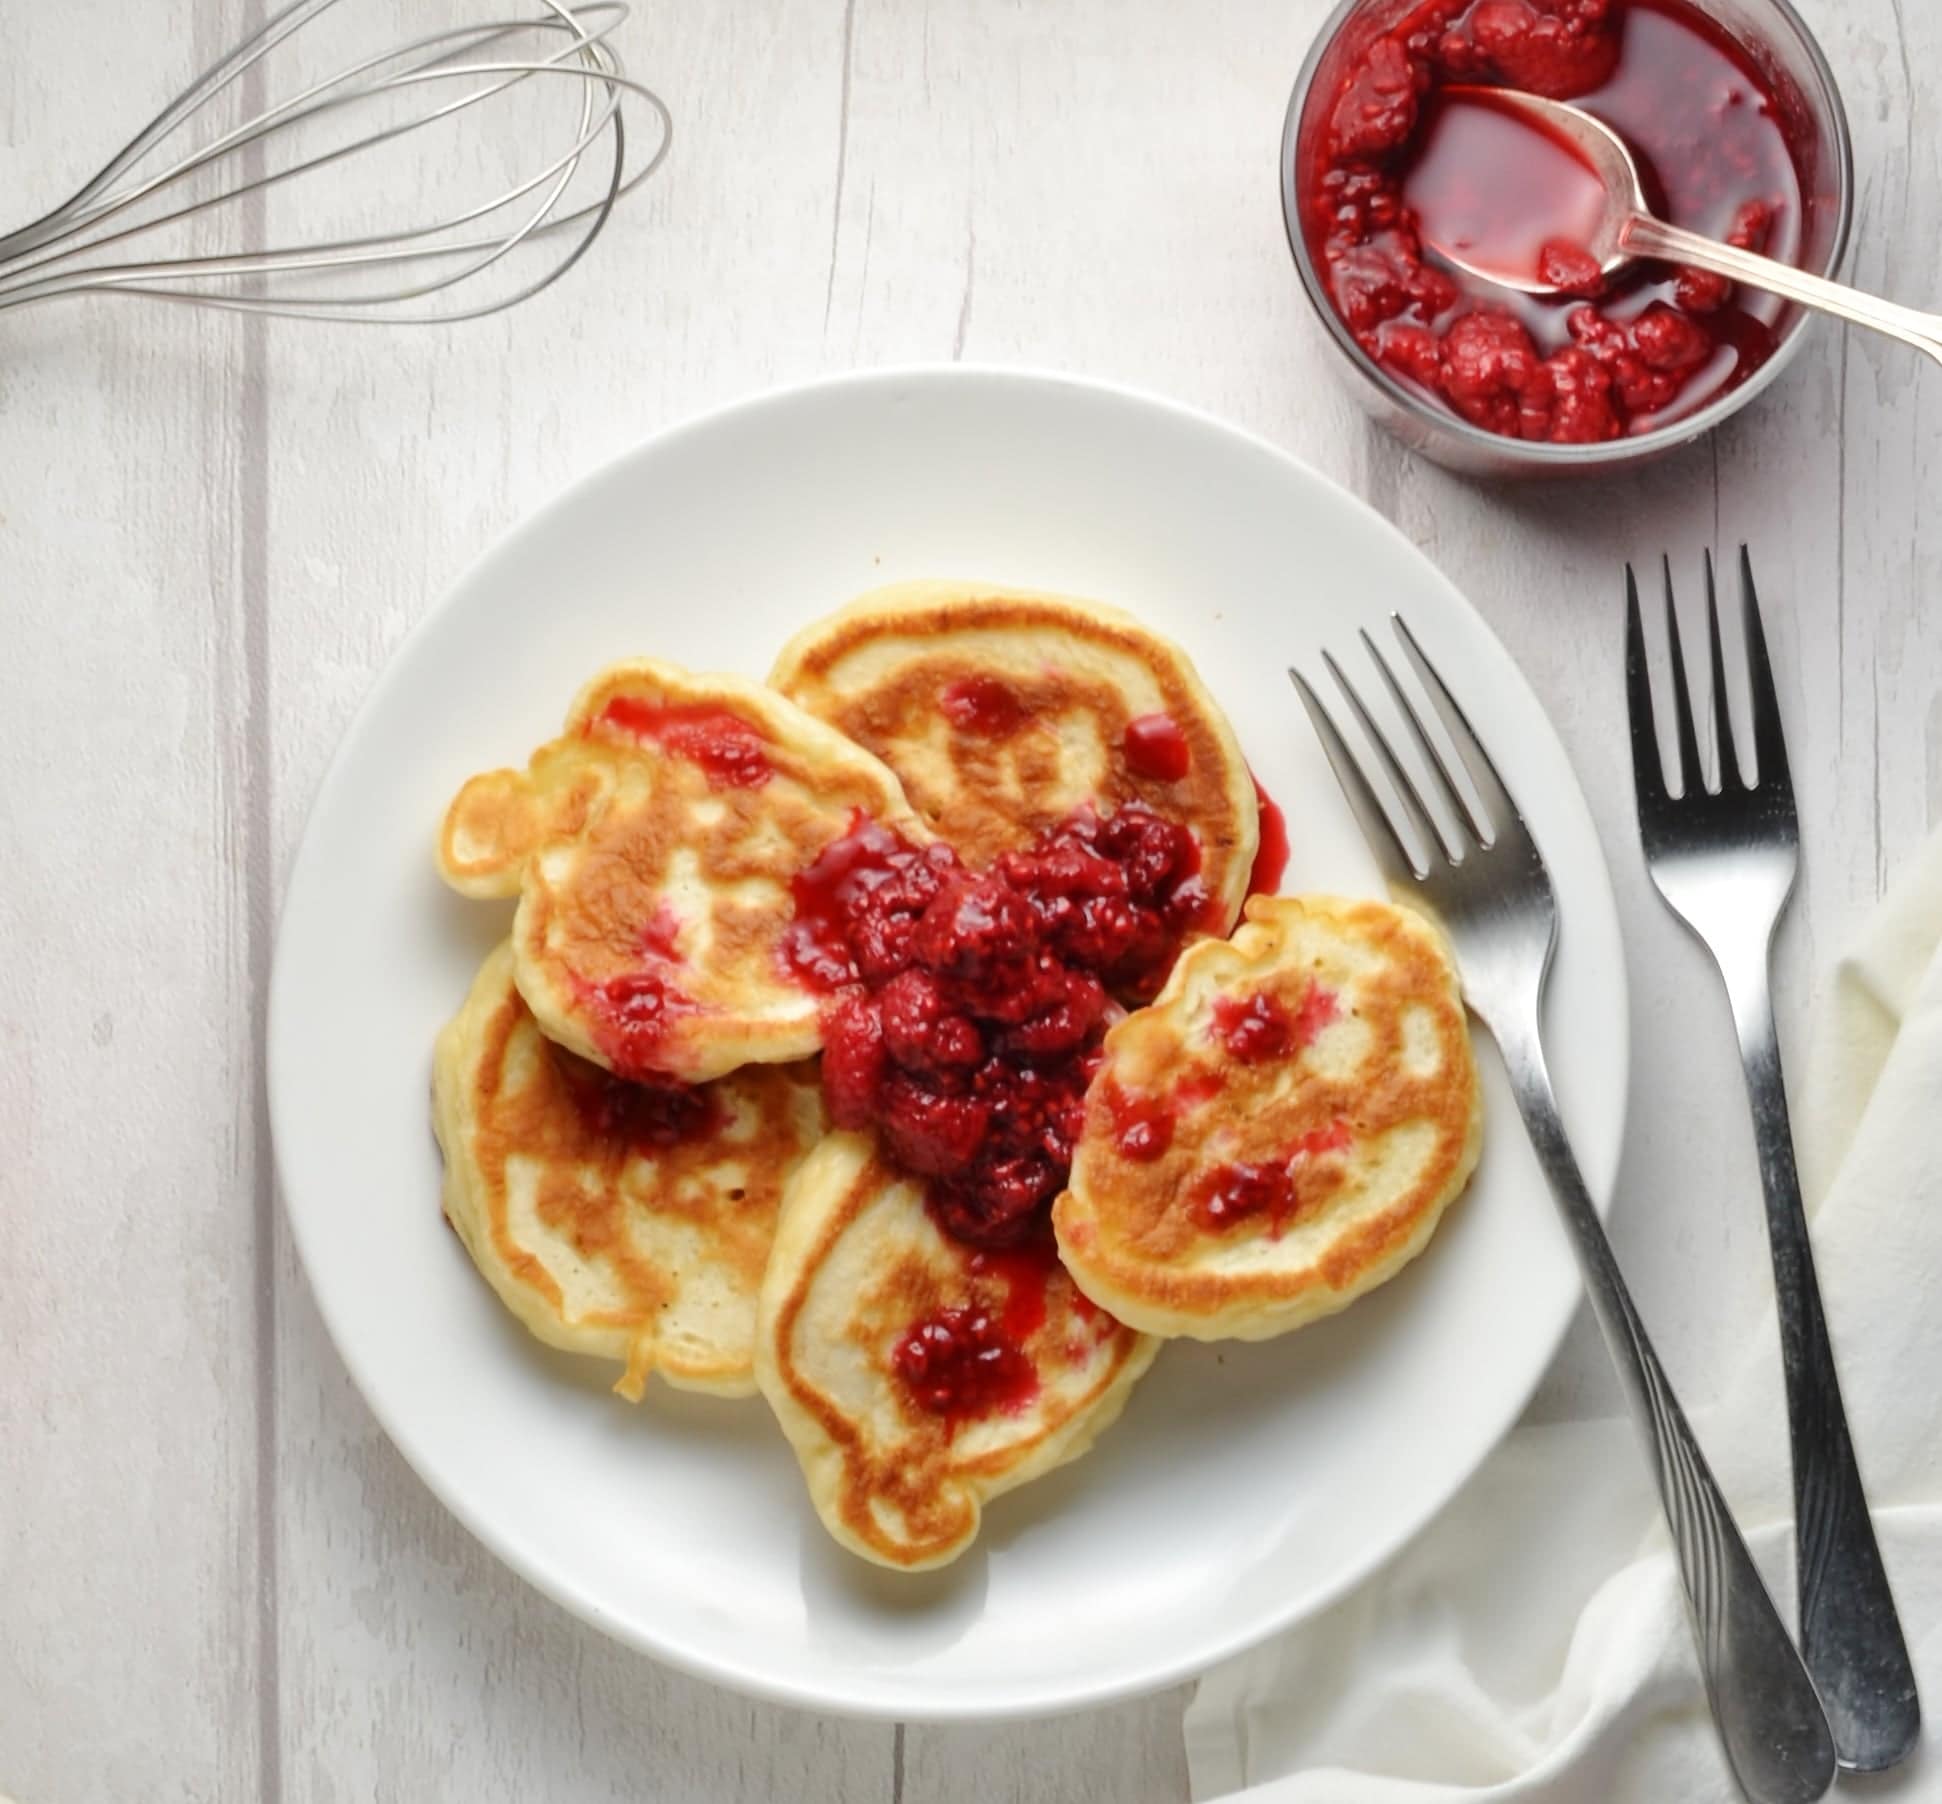 Polish pancakes with a dollop of raspberry compote on white plate with forks and raspberry compote in round dish and whisk in background.